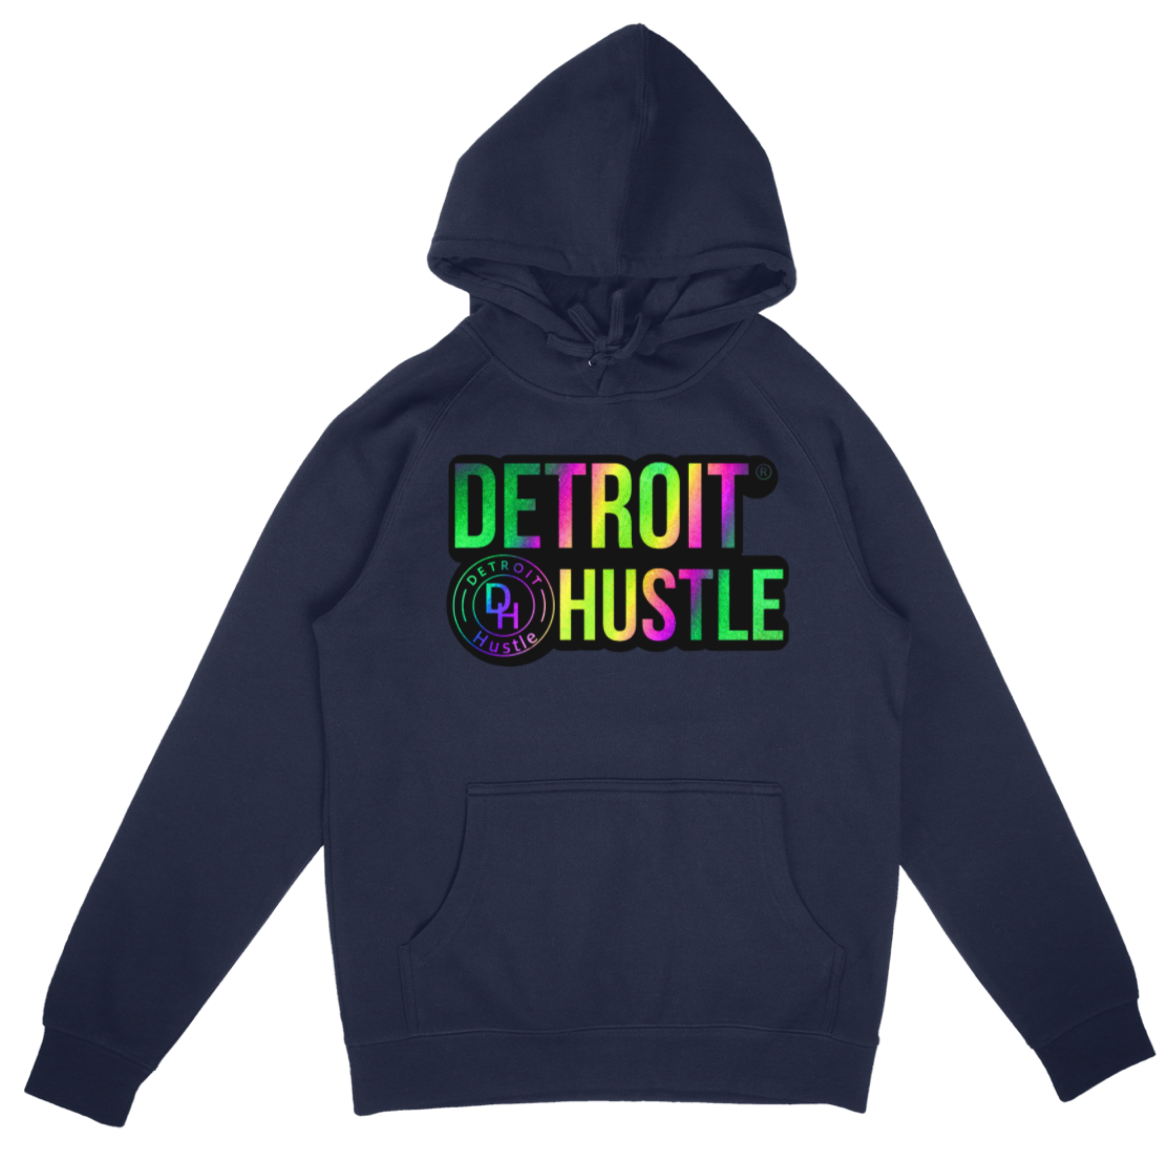 “Navy HOLOGRAPHIC REFLECTIVE” DETROIT HUSTLE hoodie